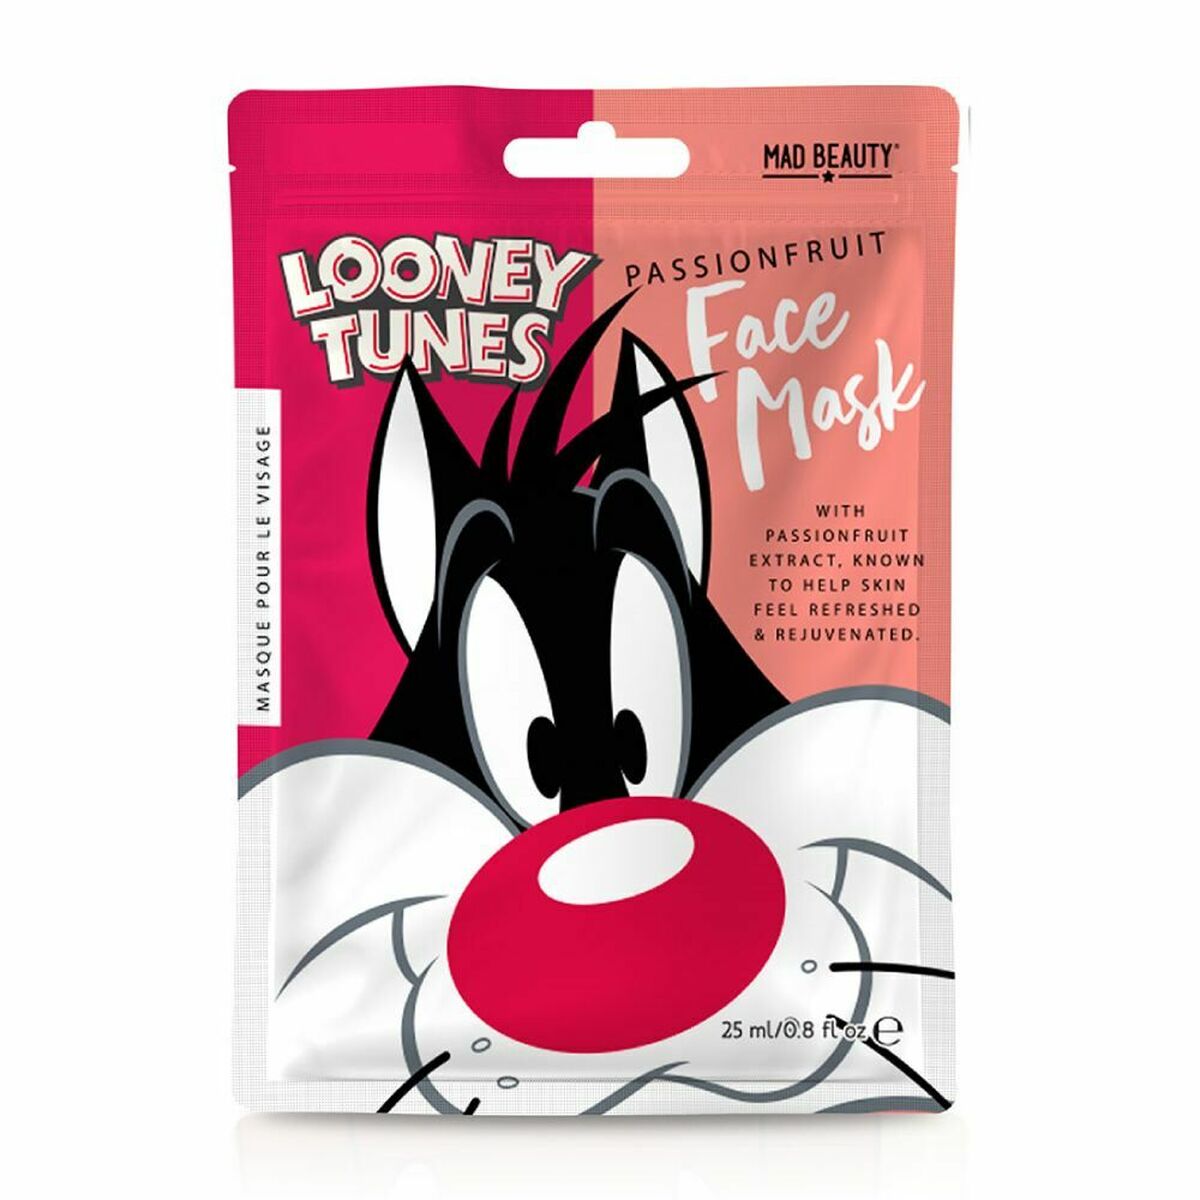 Gesichtsmaske Mad Beauty Looney Tunes Sylvester Passionsfrucht (25 ml)